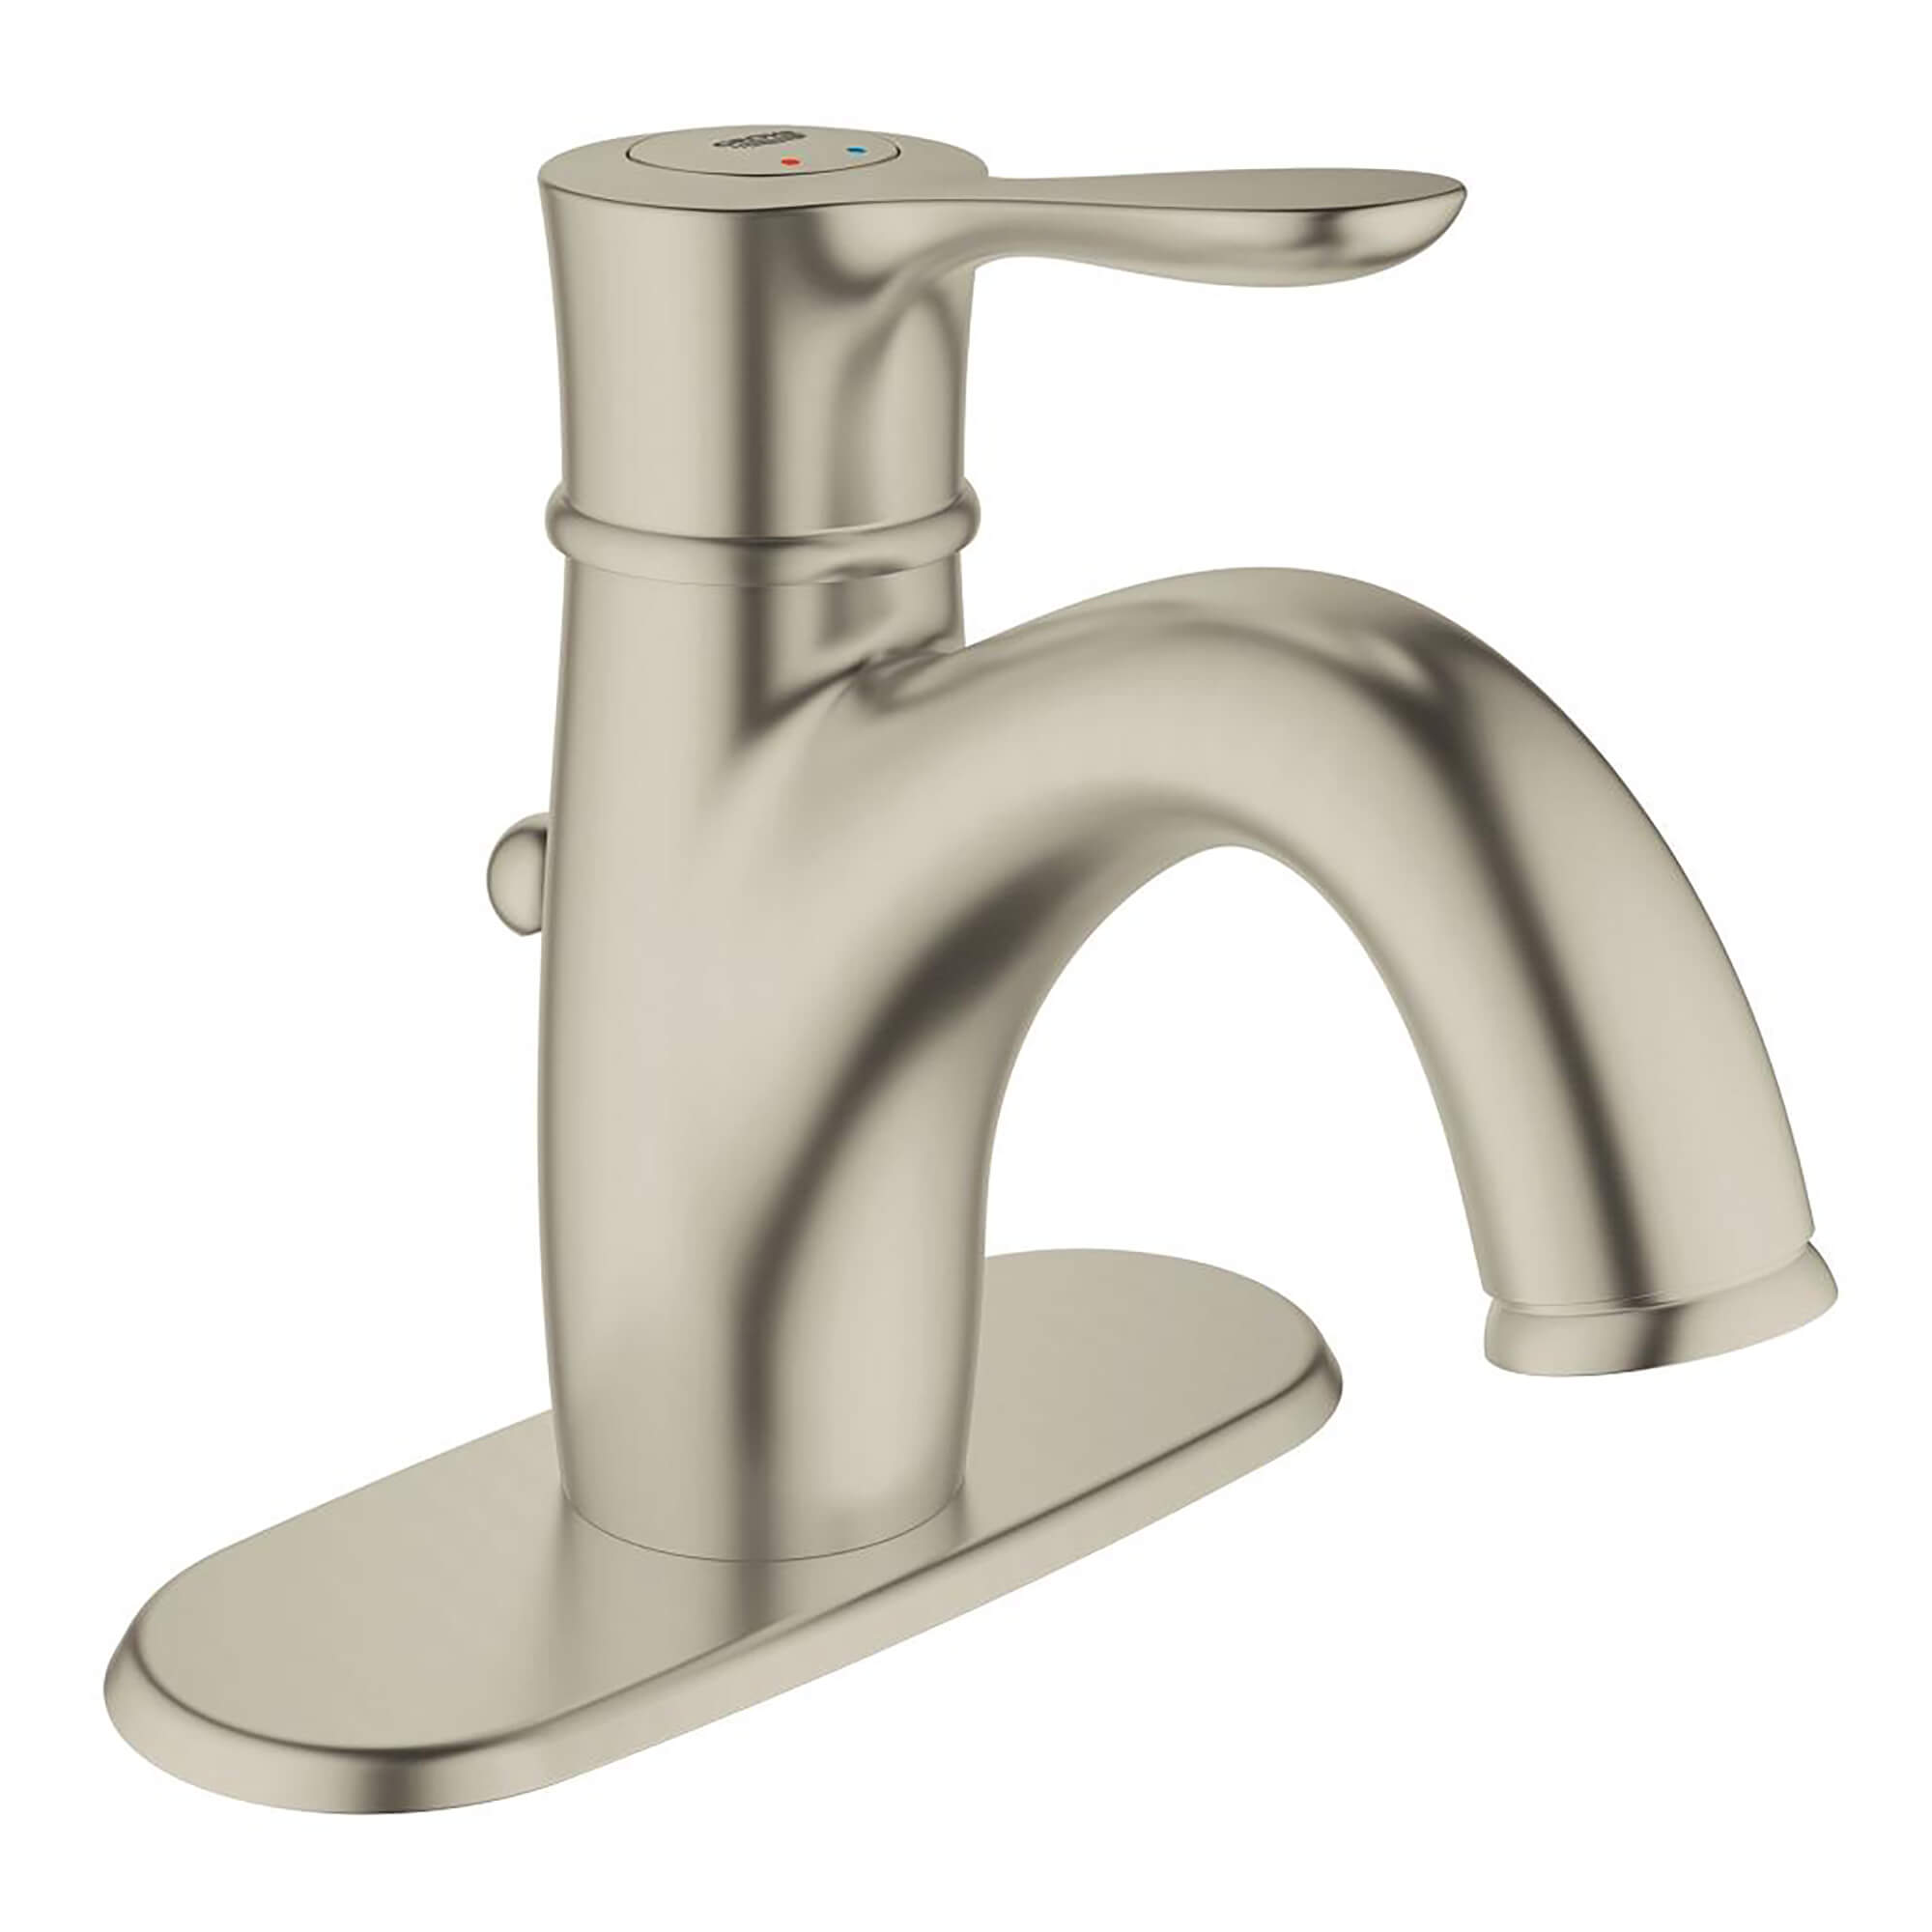 Centerset Single Handle Single Hole Bathroom Faucet With Escutcheon   15 GPM GROHE BRUSHED NICKEL